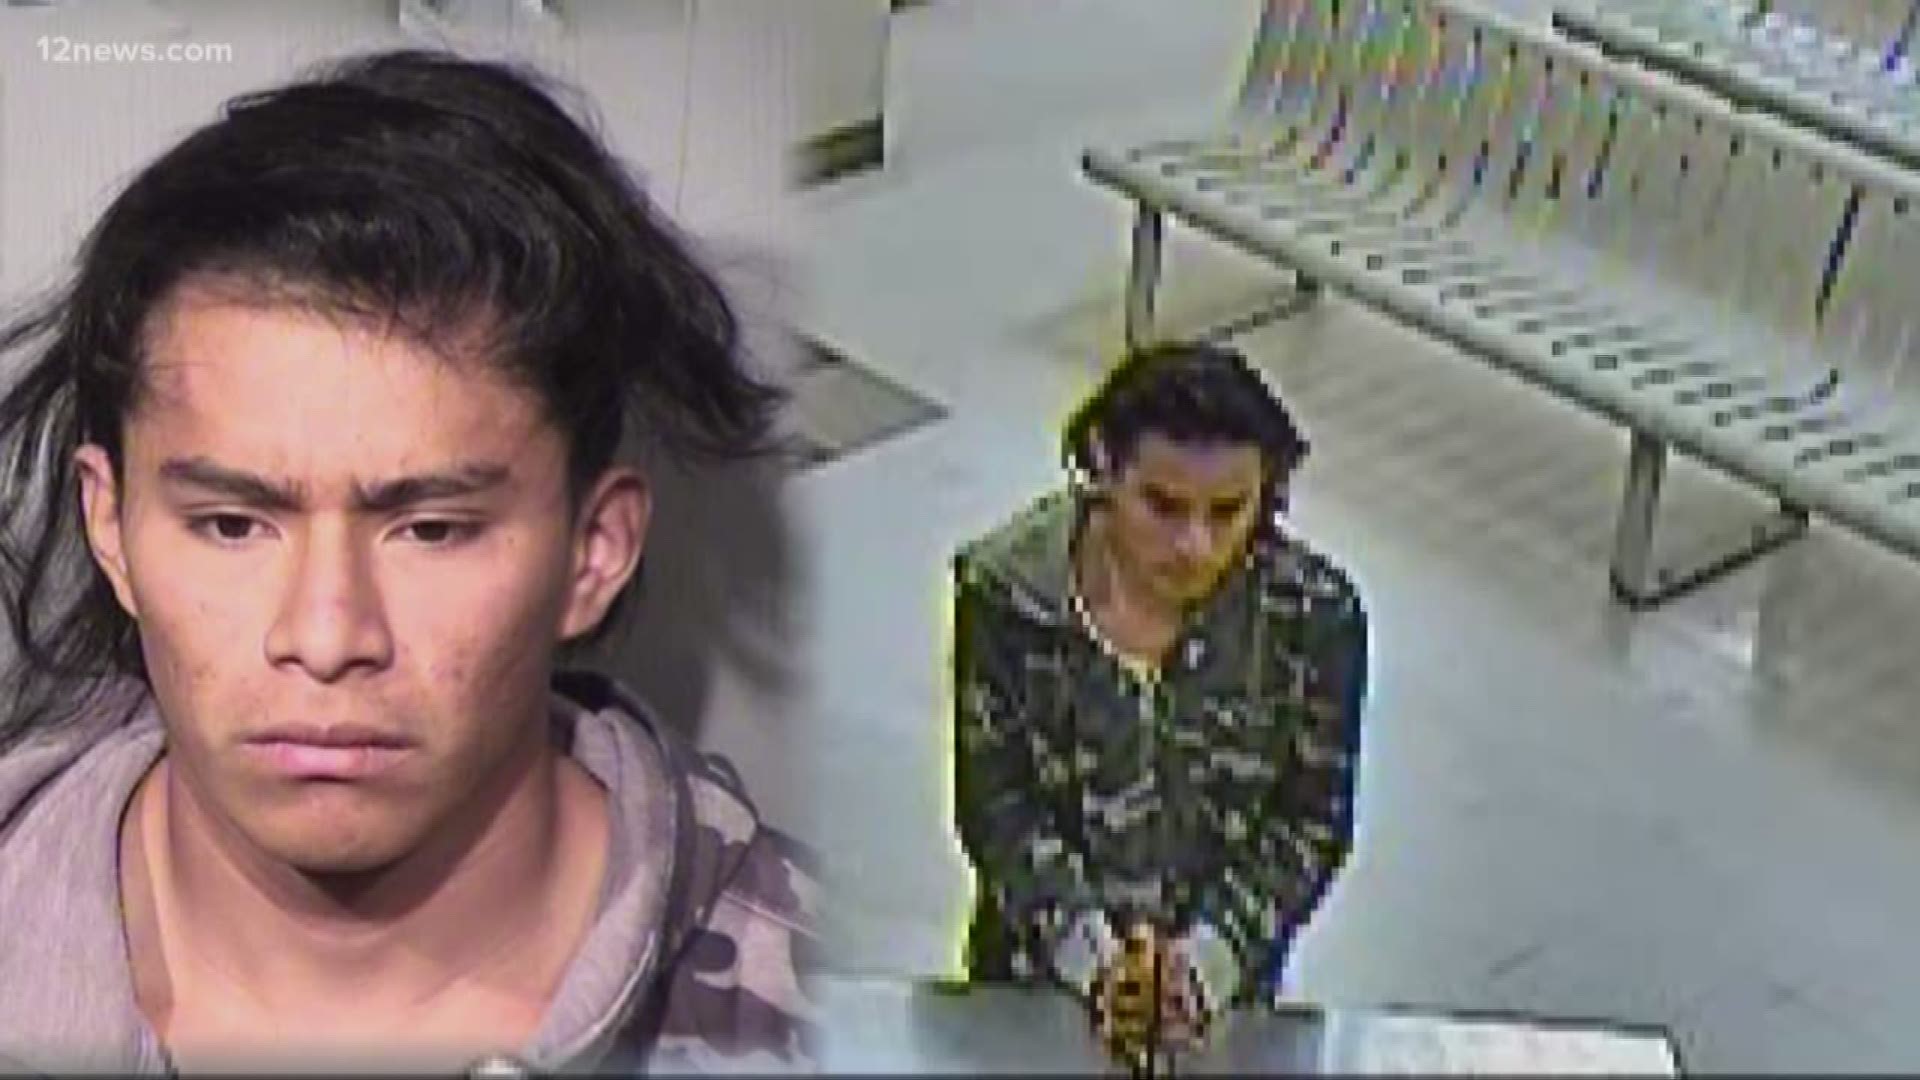 Investigators knew about a relationship between Carlos Cobo-Perez, 20, and the 11-year-old in November. Cobo-Perez had told detectives he would stop seeing her.